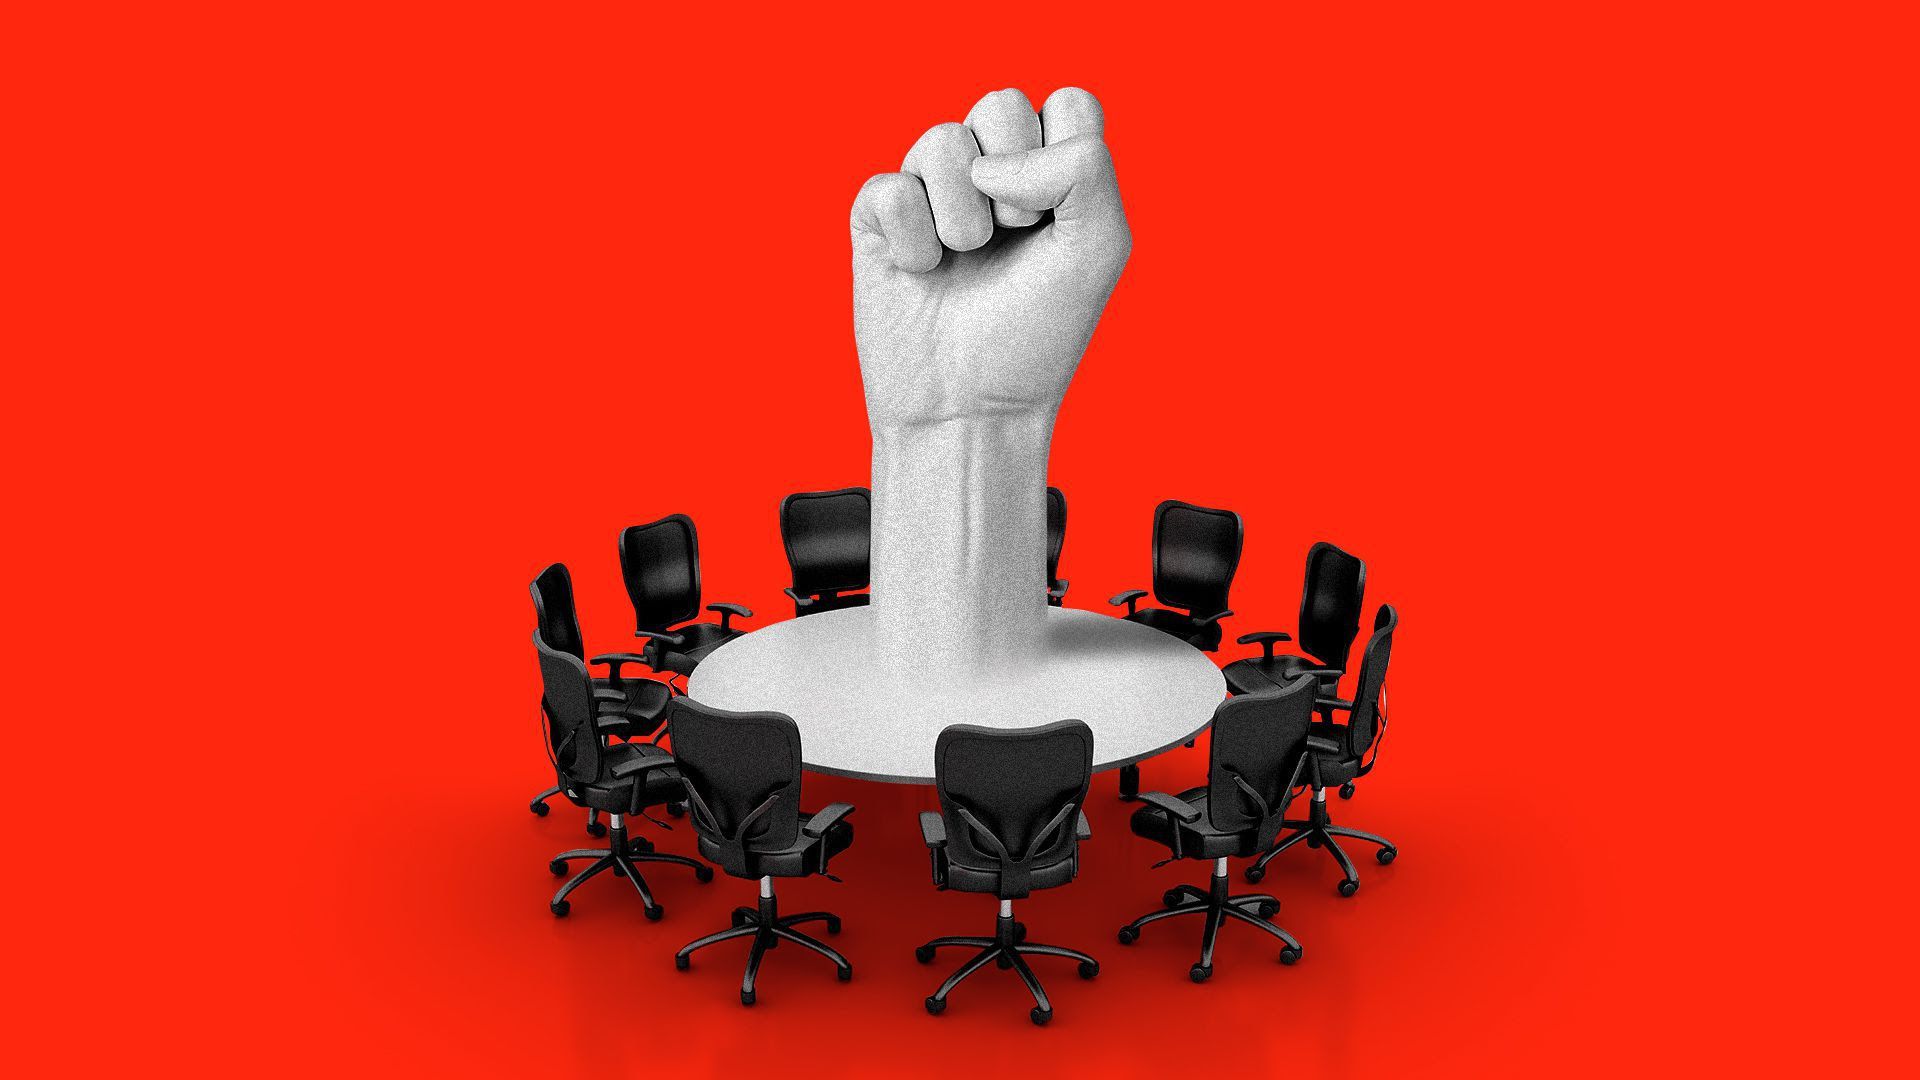 A fist rising out of a circular boardroom table surrounded by empty chairs